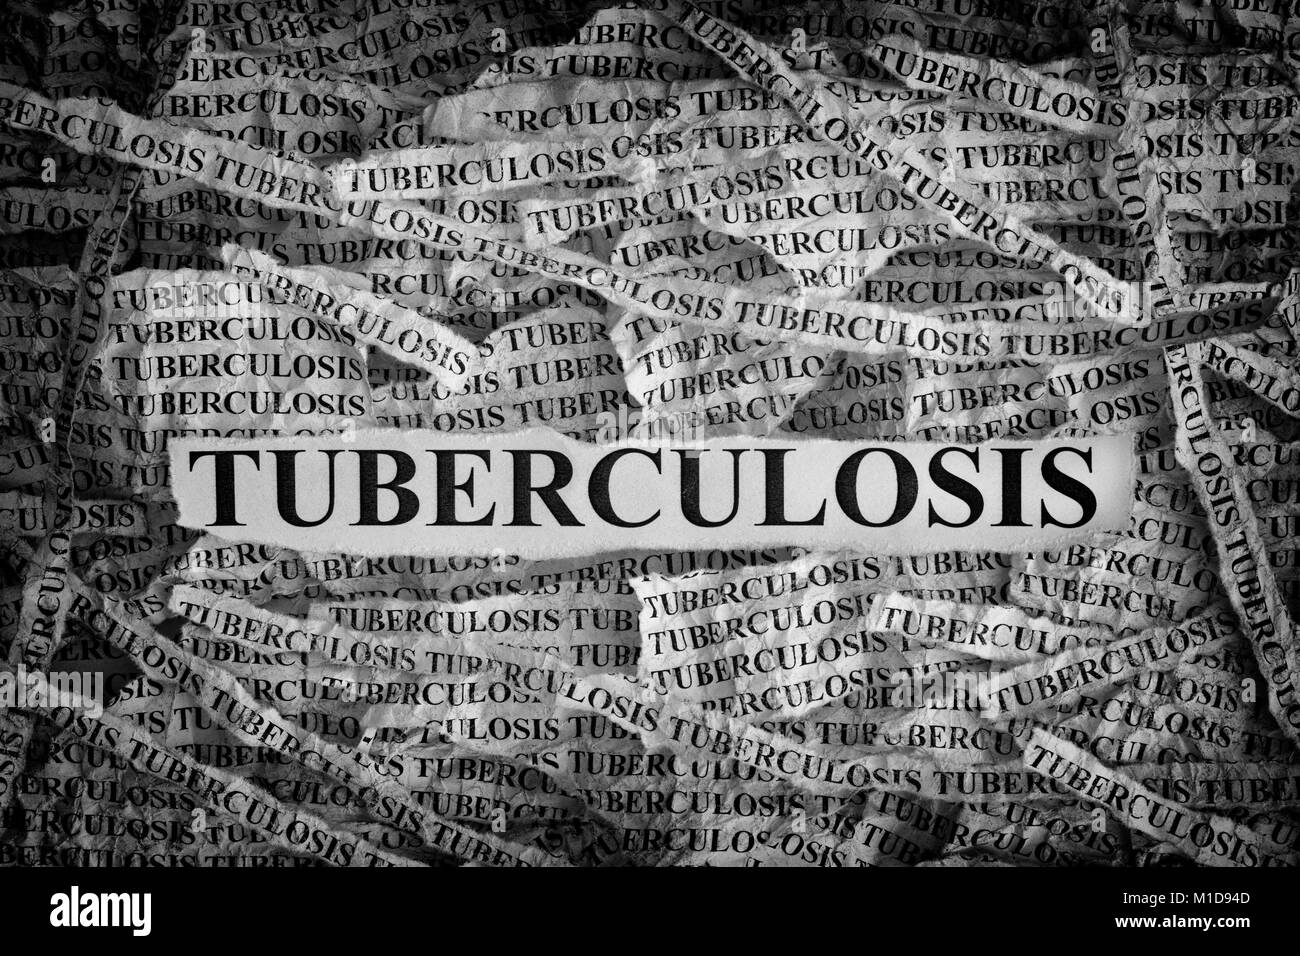 Tuberculosis. Torn pieces of paper with the word Tuberculosis. Concept Image. Black and White. Closeup. Stock Photo